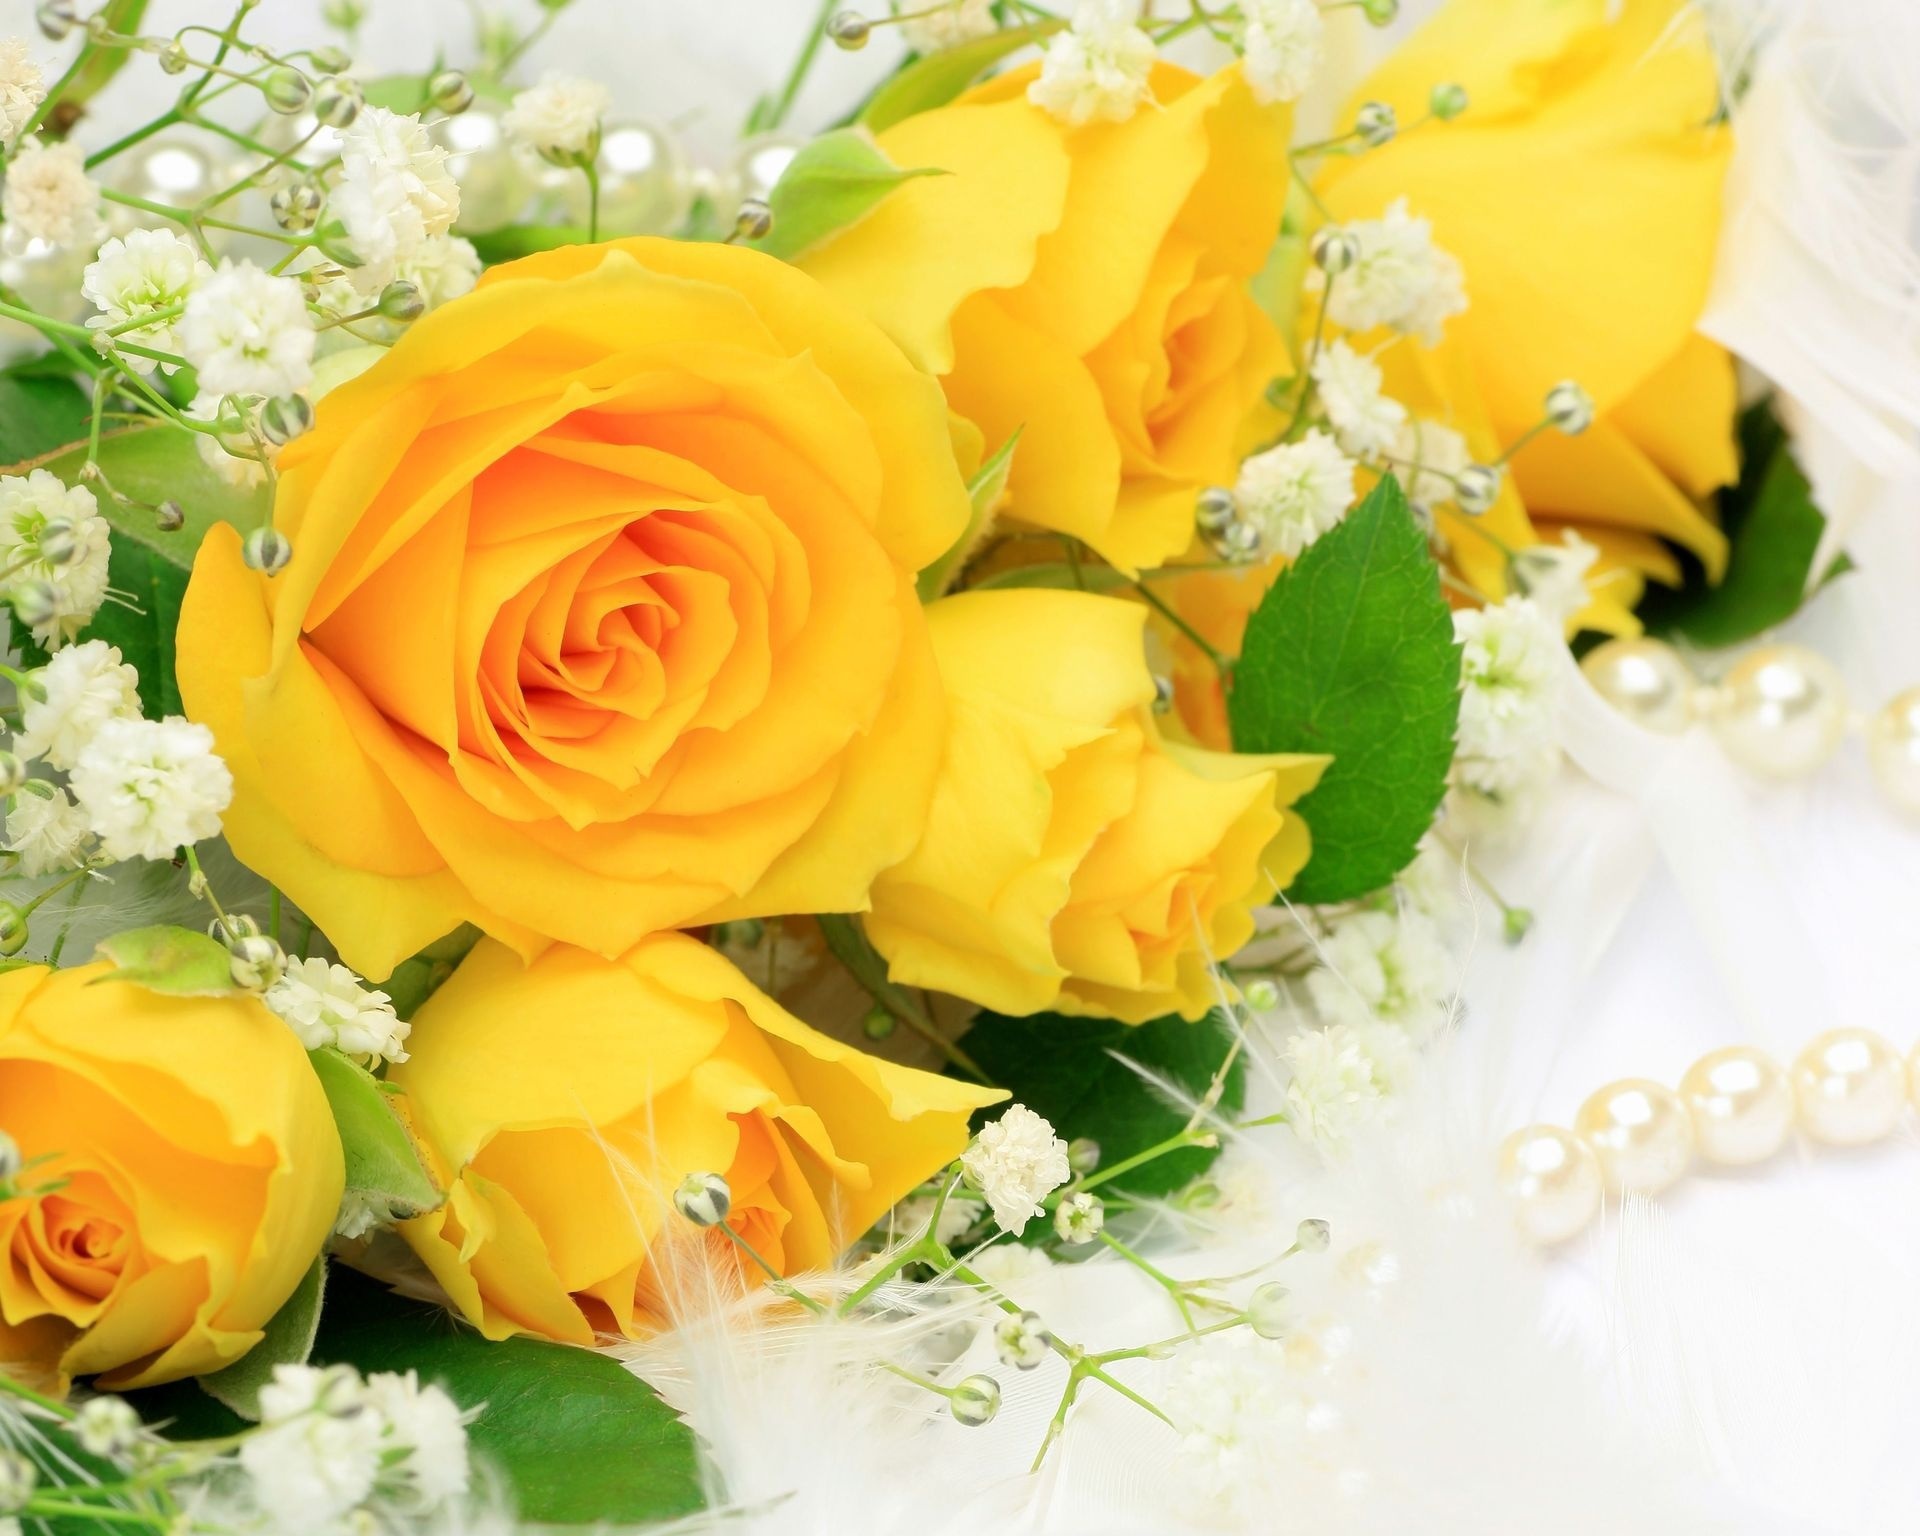 Charming_yellow_roses_with_pearls.jpg